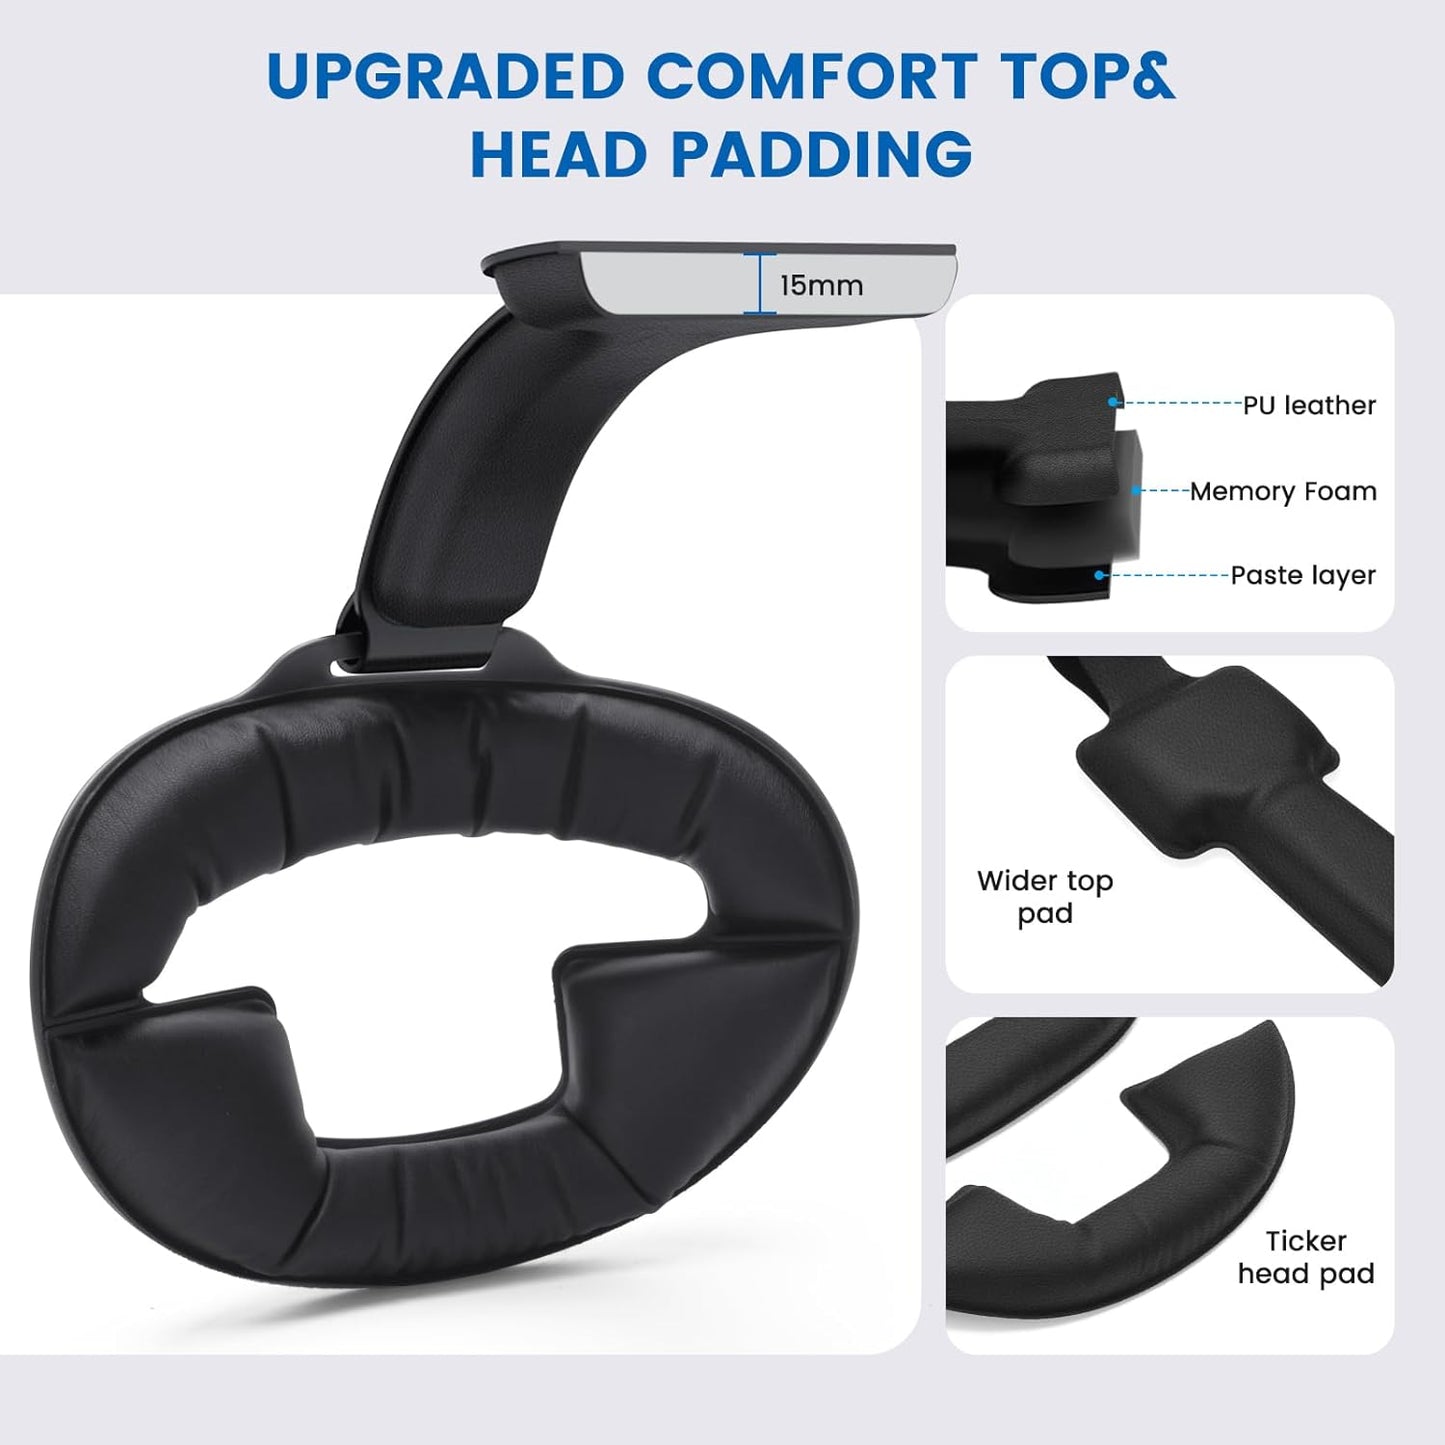 Nova Battery Head Strap for Meta Quest 3, Increase Play-Time and Comfort in VR